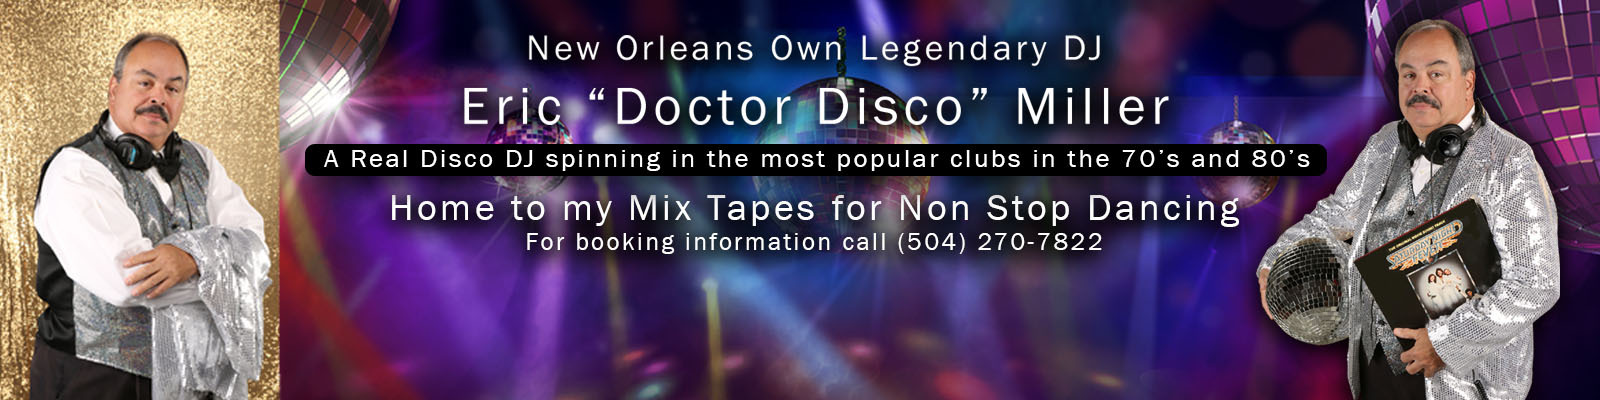 Doctor Disco’s Mix Tapes